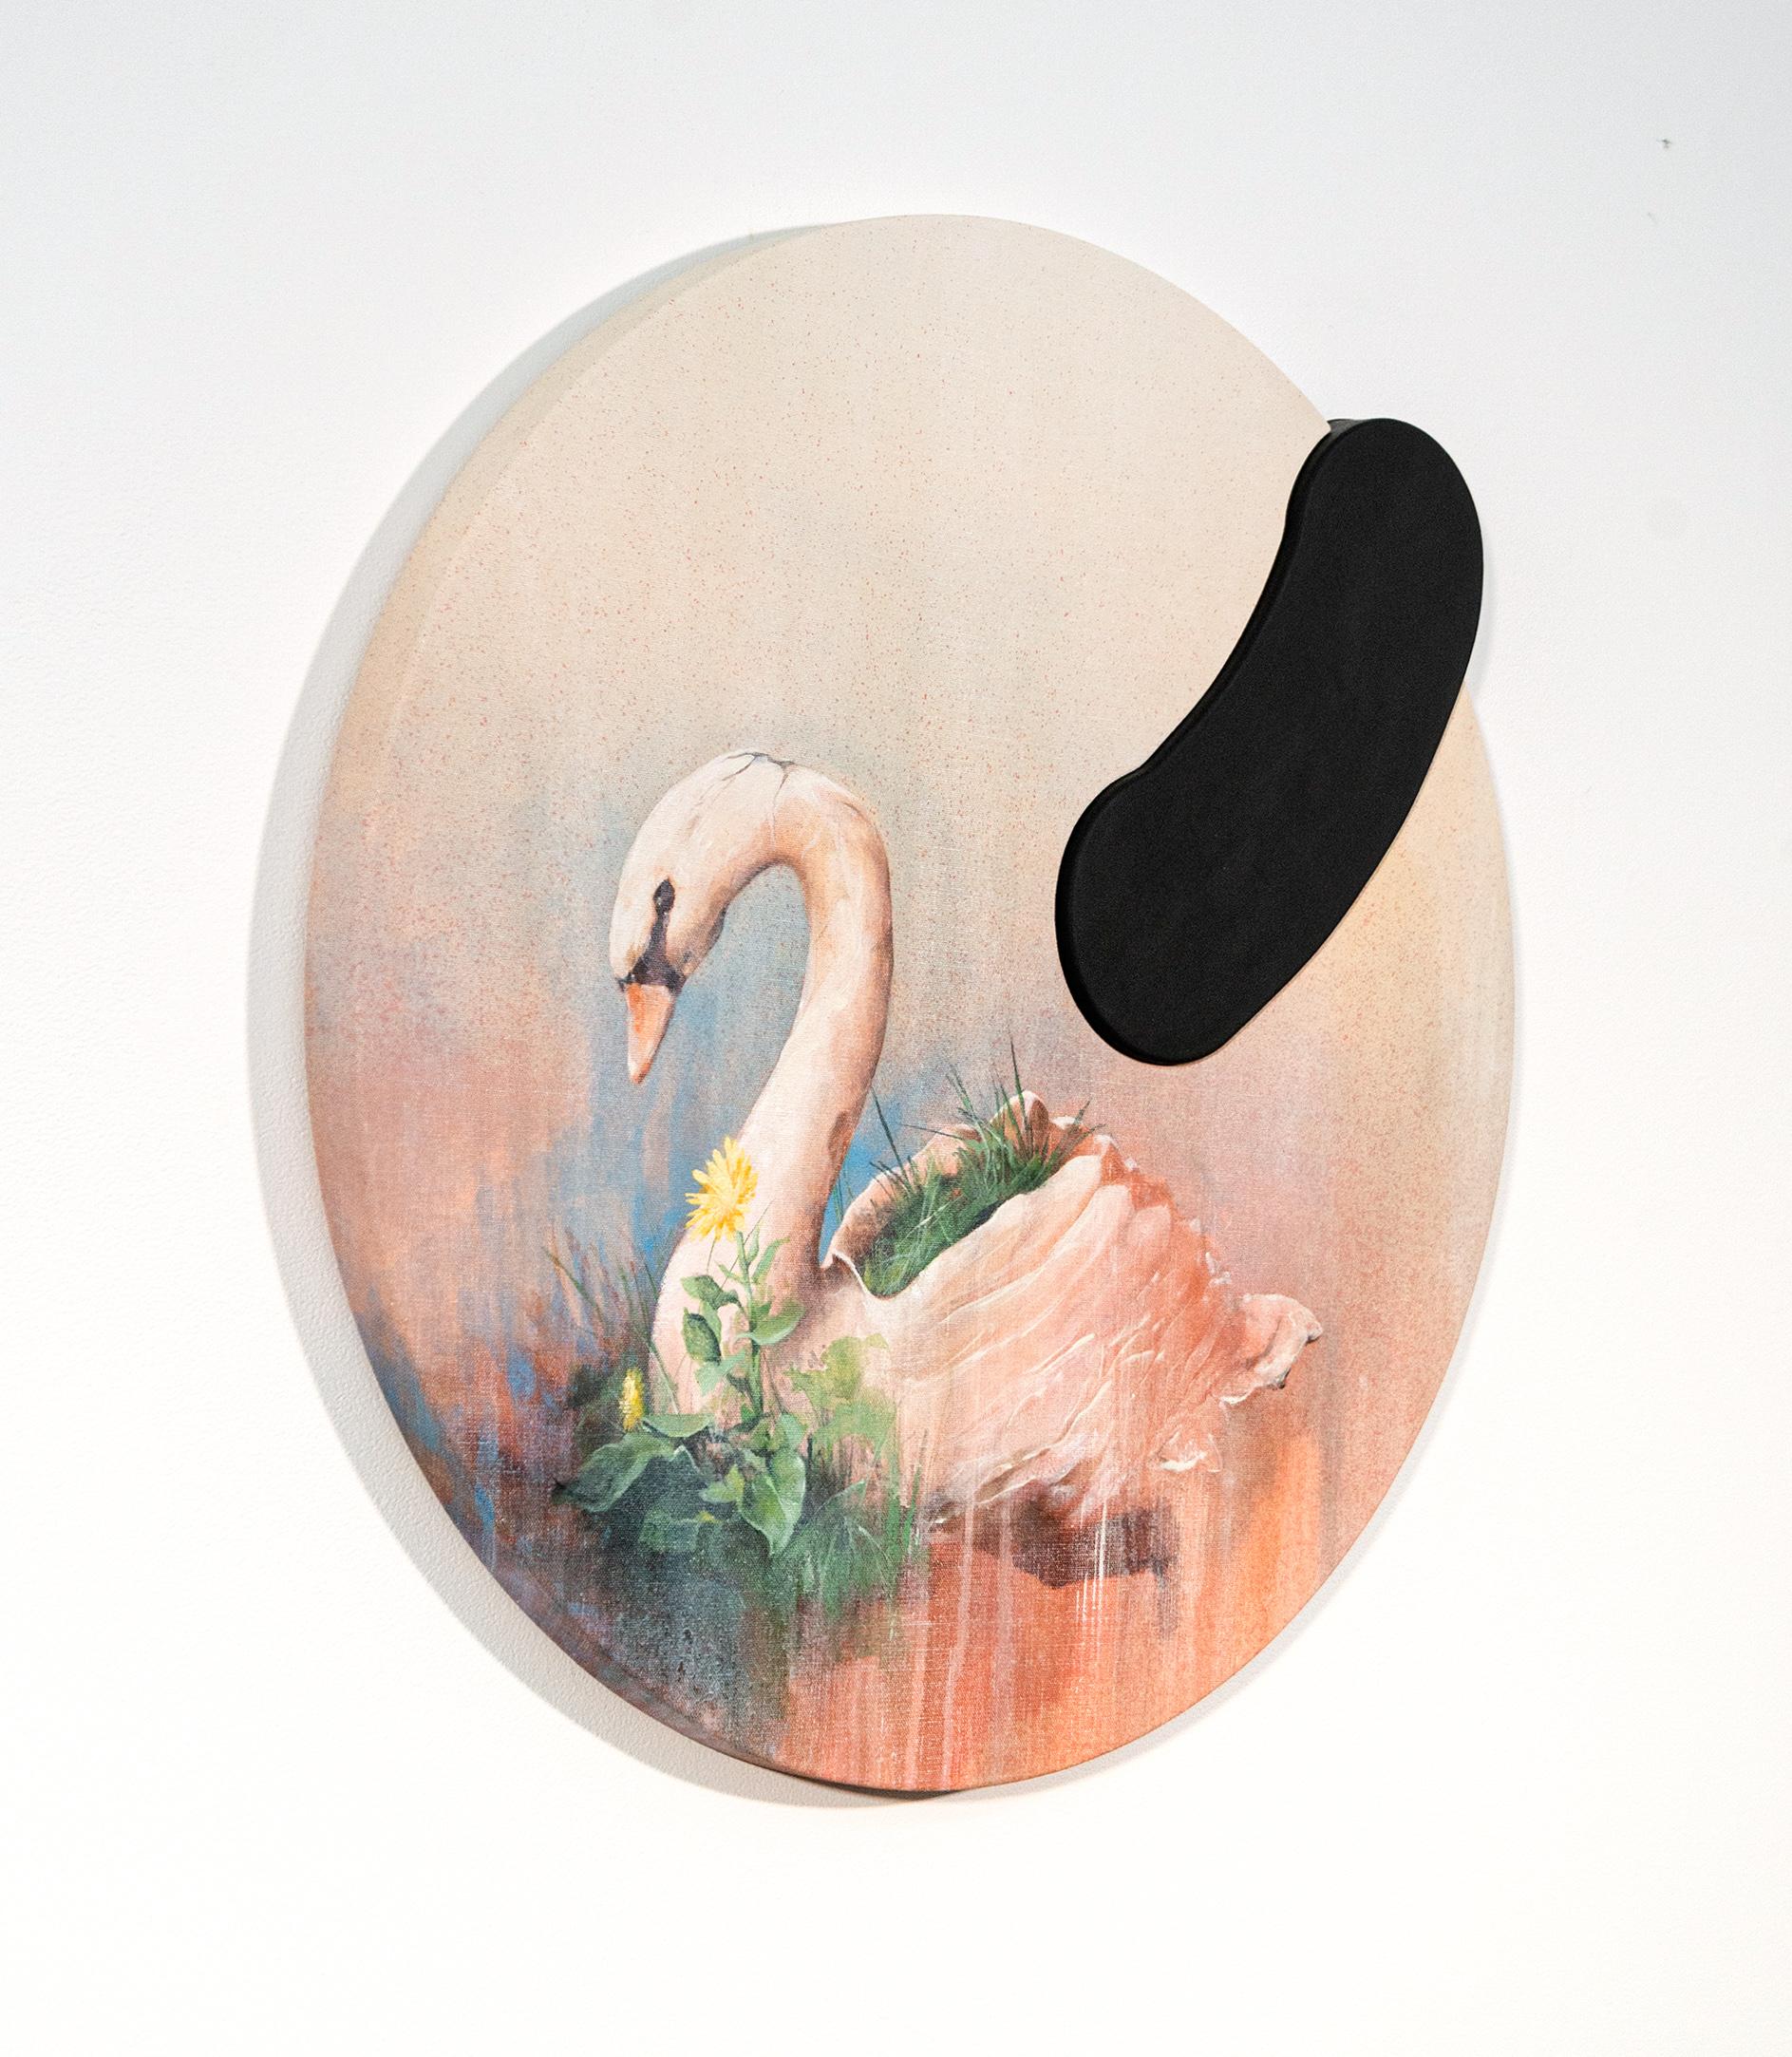 At once classic and contemporary, this painting by Jahn Page is part of a series dedicated to ‘an examination of life through the filter of flowers.’ On a tondo (circular canvas) a finely detailed plastic white swan becomes the centrepiece for a